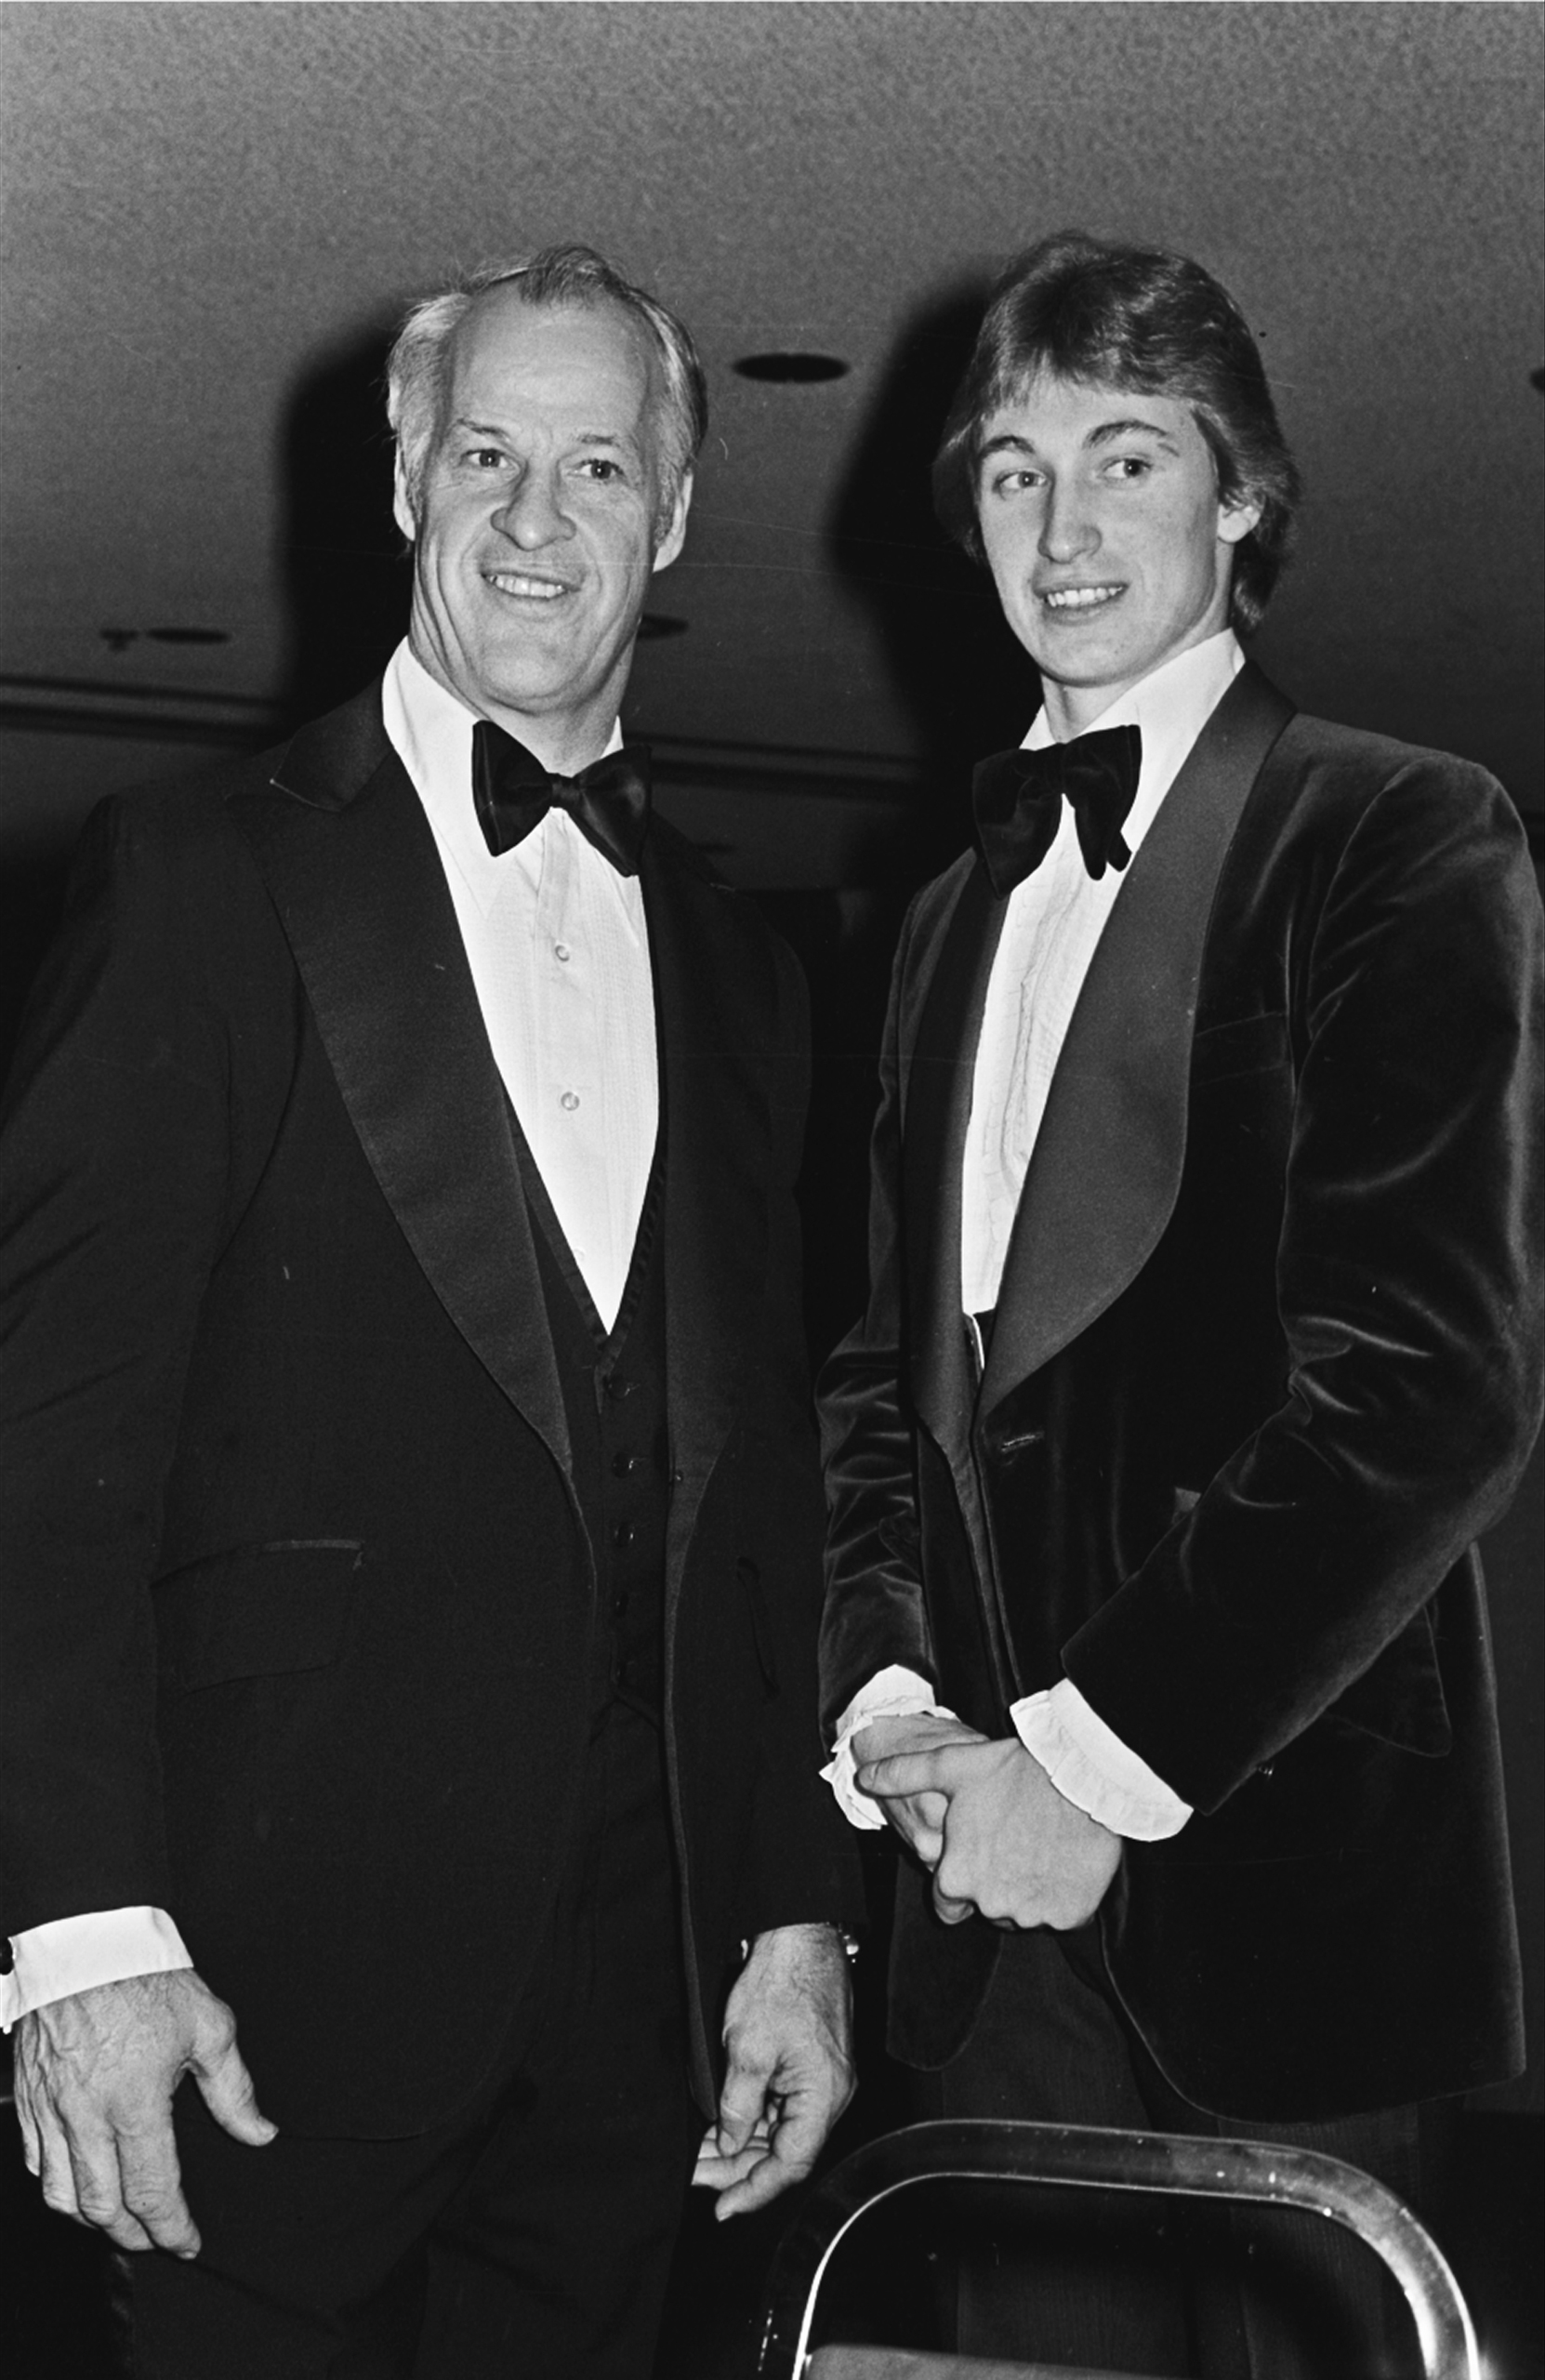 Gordie Howe, left, of the Hartford Whalers, and Wayne Gretzky of the Edmonton Oilers, pose for photographers at the NHL All-Star benefit dinner in Detroit, Feb. 5, 1980. Howe, 51, will play for the Prince of Wales Conference , and Gretzky, 19, will play for the Clarence Campbell Conference All-Stars. Howe is making a record 23rd appearance in the All-Star game and Gretzky will be making his first. (AP Photo)